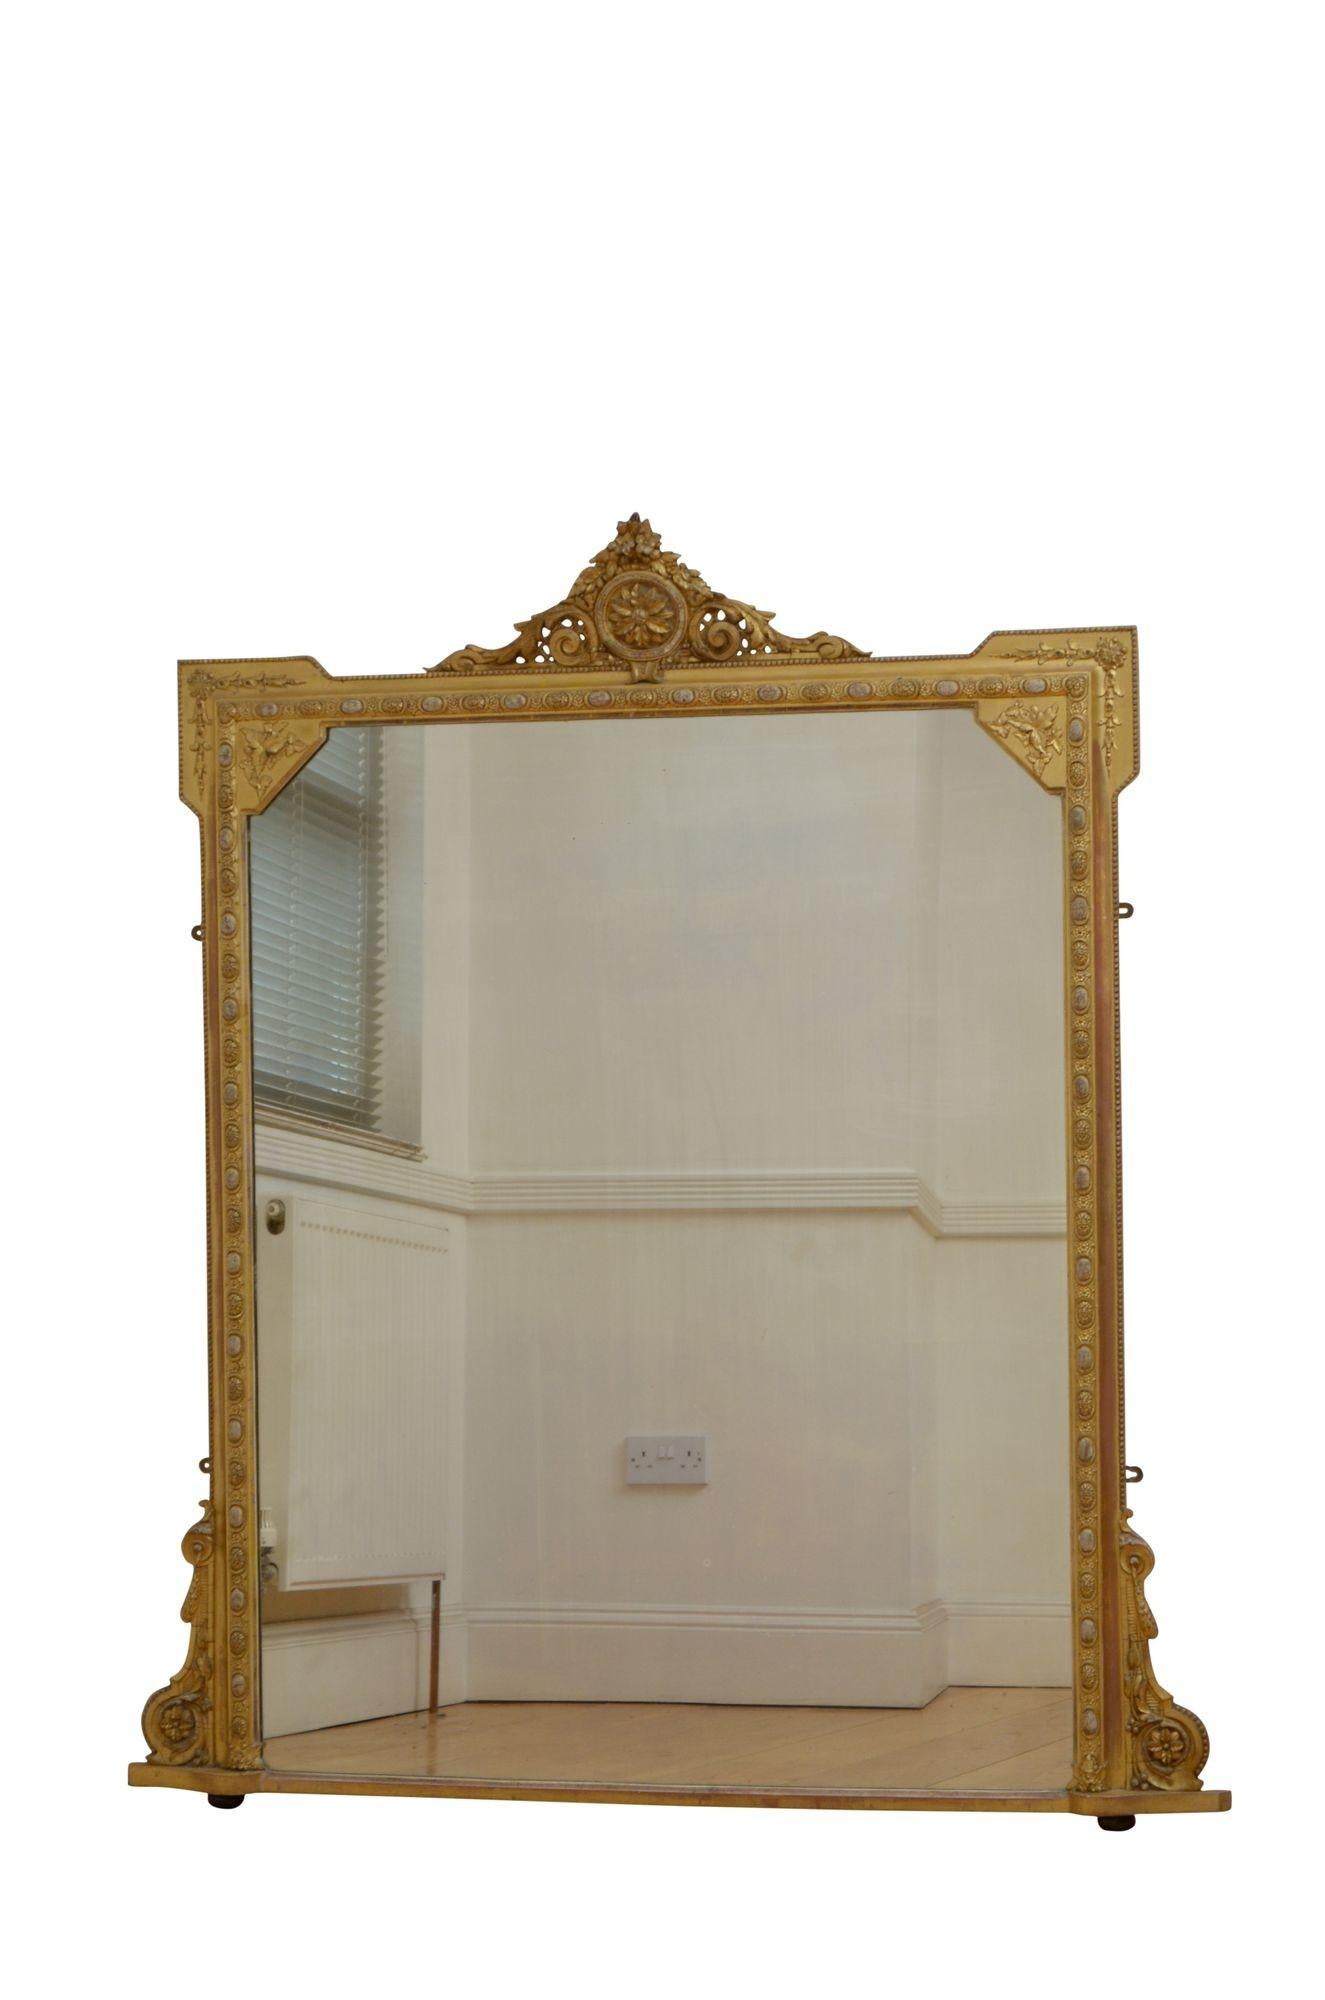 K0609  Superb Victorian giltwood overmantel mirror, having original mirror plate with air bubbles and minor imperfections in gilded and moulded, carved and beaded frame with floral scrolls to the base, projecting floral corners and lattice work